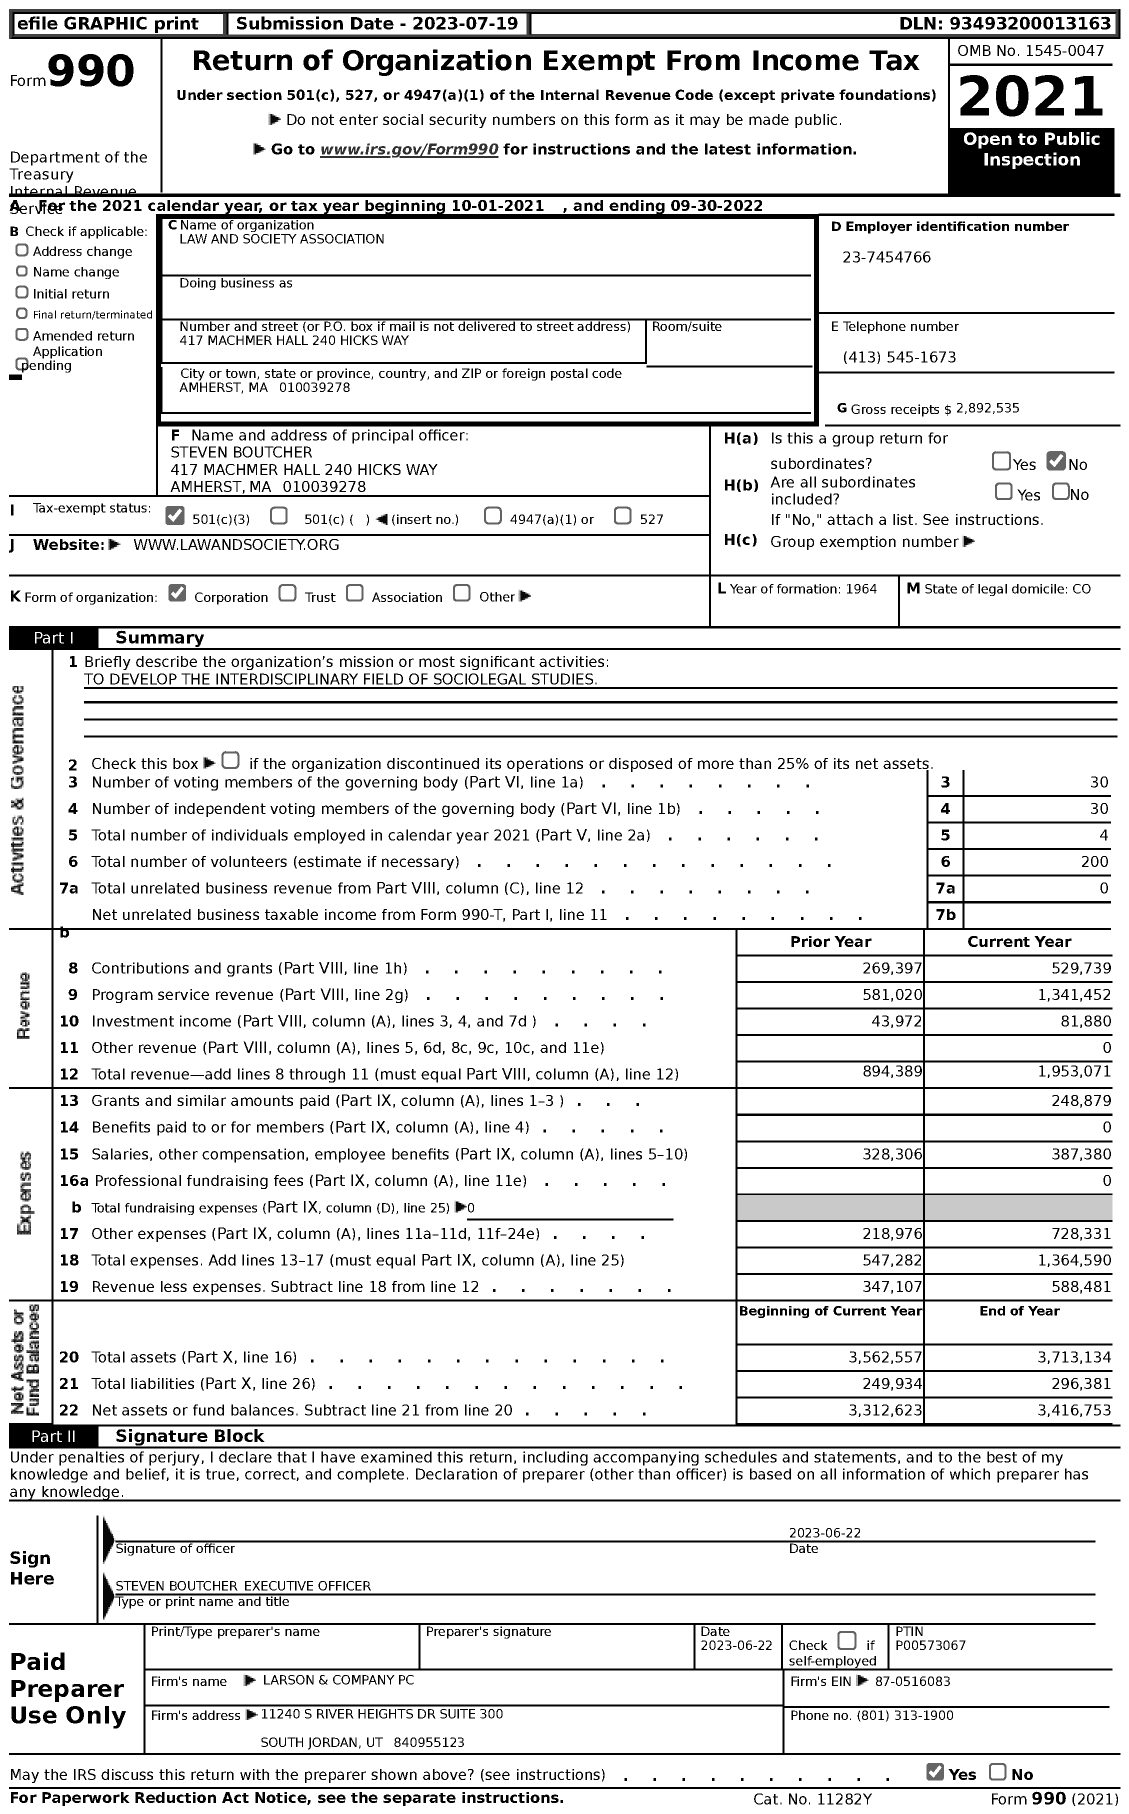 Image of first page of 2021 Form 990 for Law and Society Association (LSA)